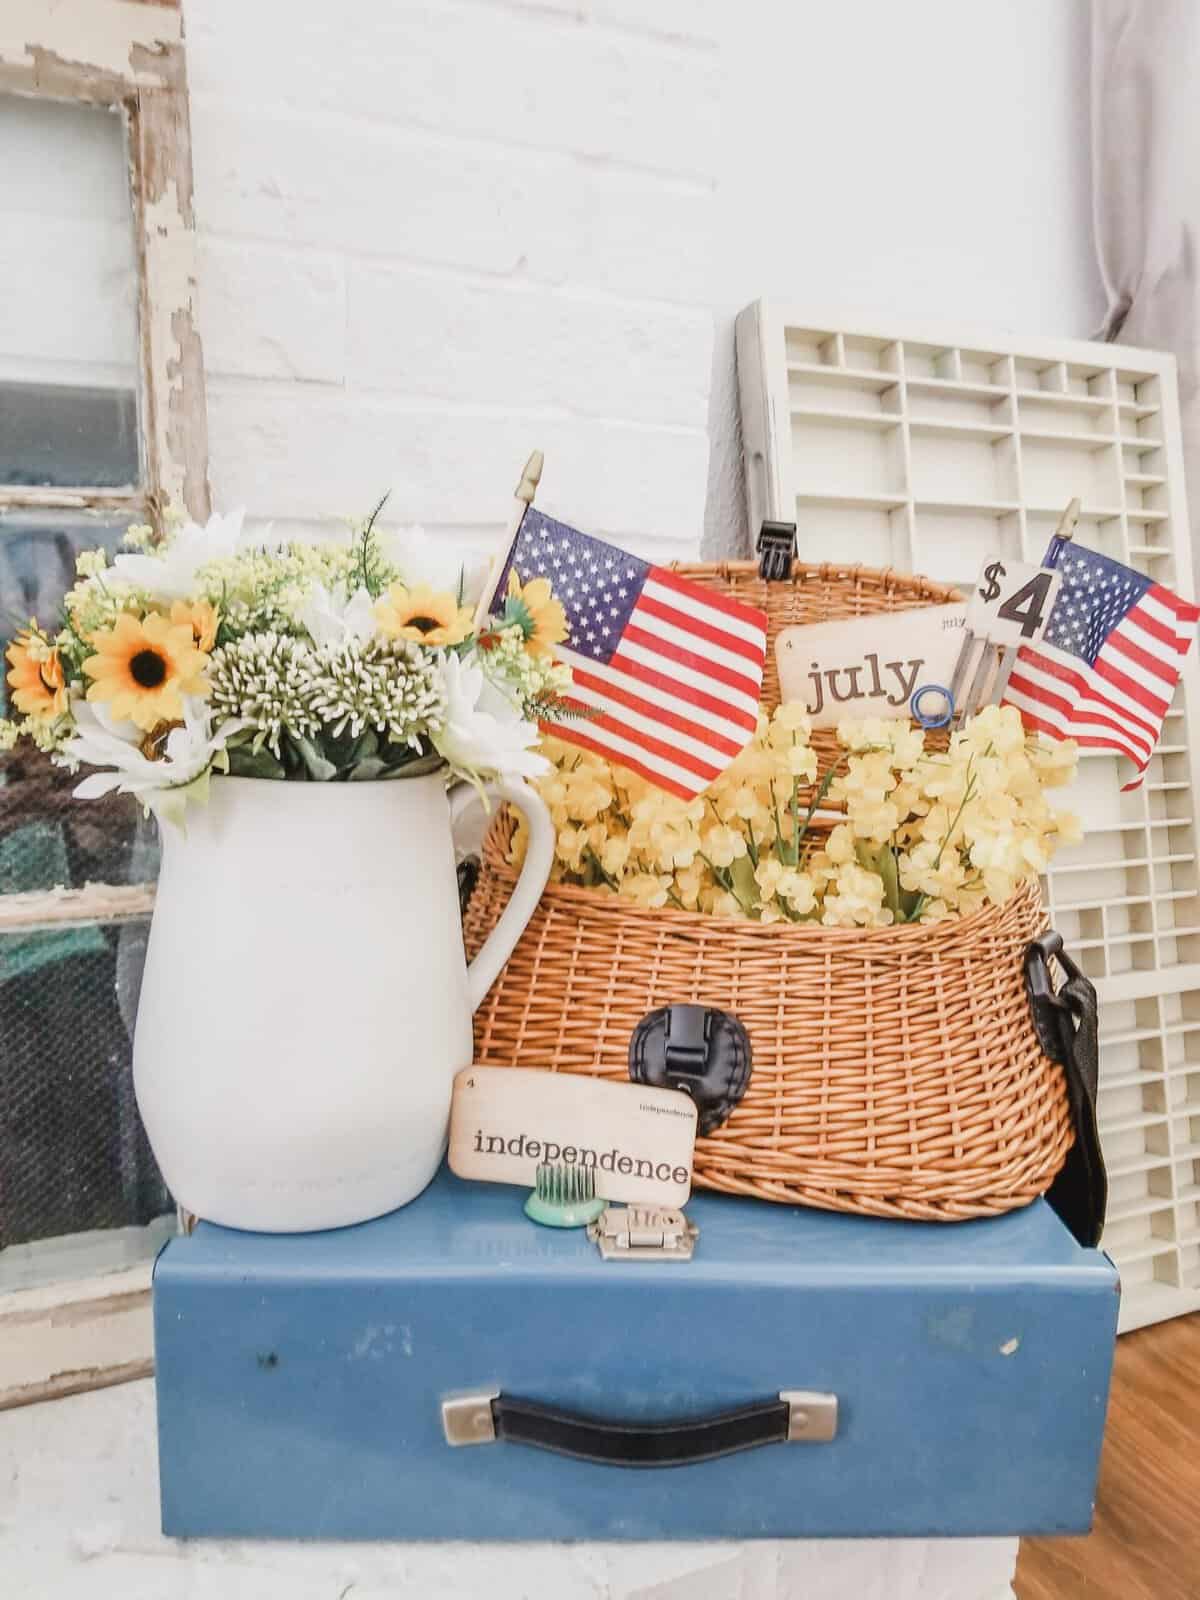 A blue table holds a white pitcher with flowers, a basket with yellow flowers, two small American flags, and wooden blocks spelling "independence" and "life." A sign reads "July 4.